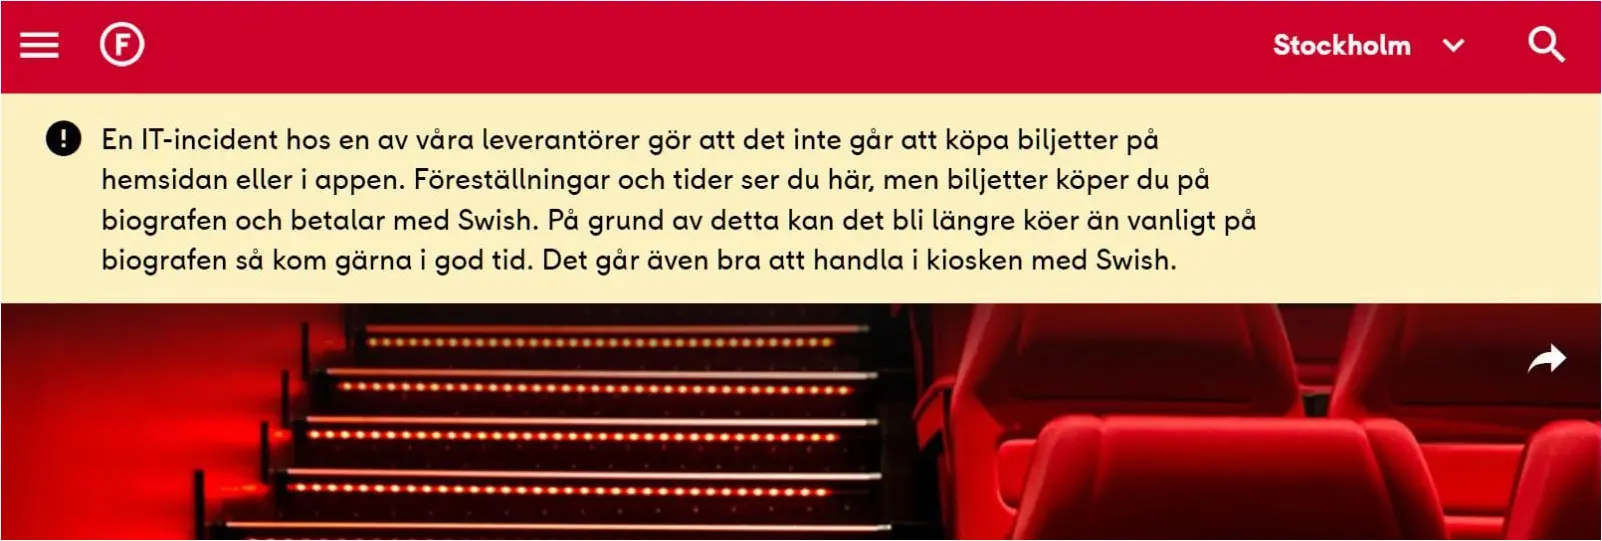 Message on Filmstaden's website warning of the IT outage